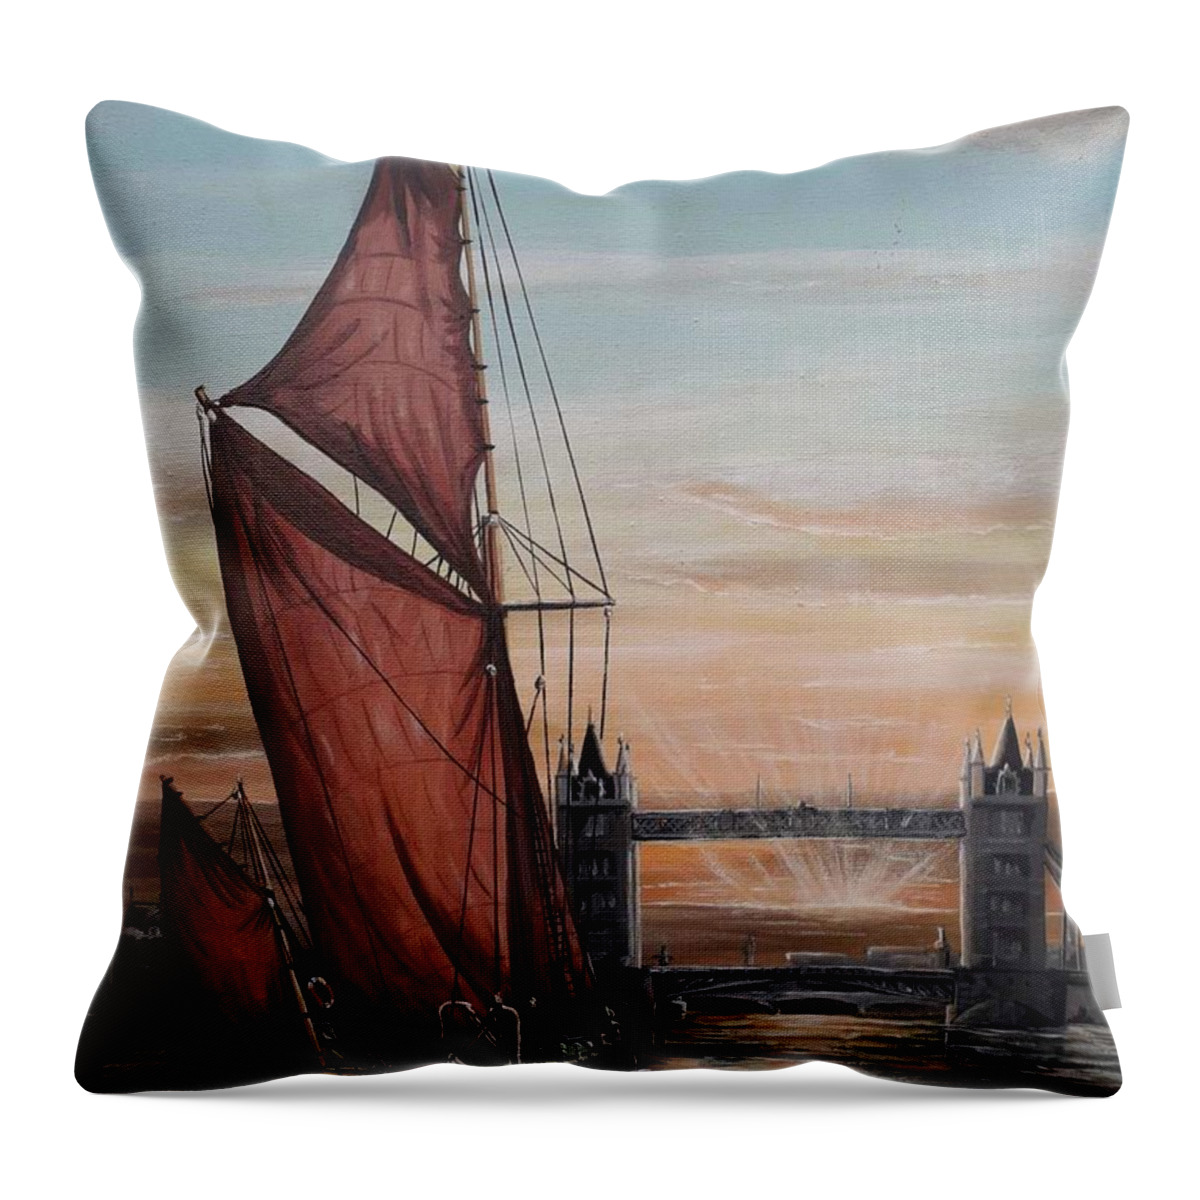 Thames Sailing Barge Throw Pillow featuring the painting Thmes Sailing Barge Dannebrog heading towards Tower Bridge London by Mackenzie Moulton